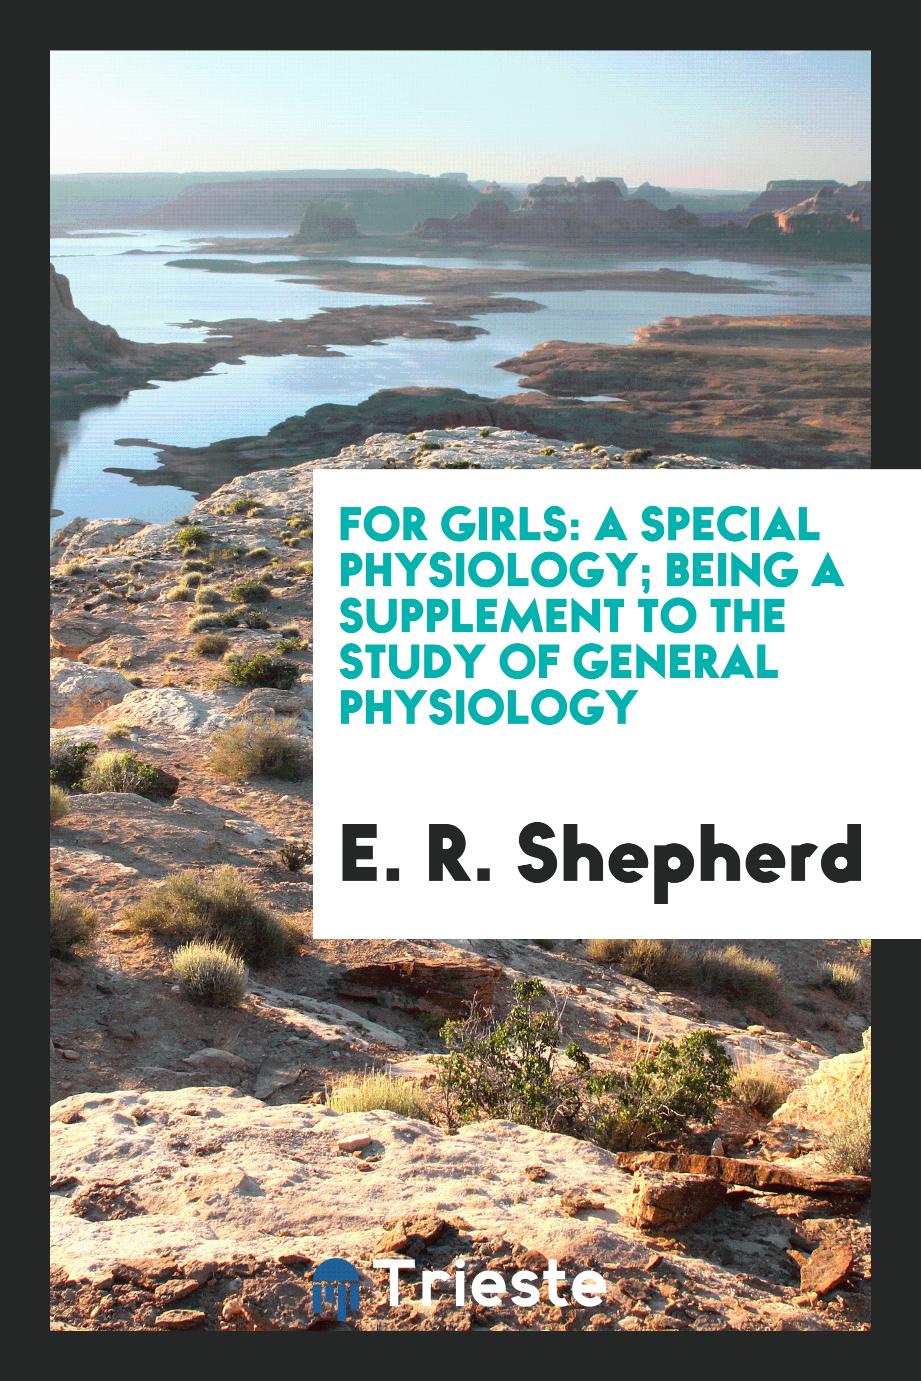 For Girls: A Special Physiology; Being a Supplement to the Study of General Physiology